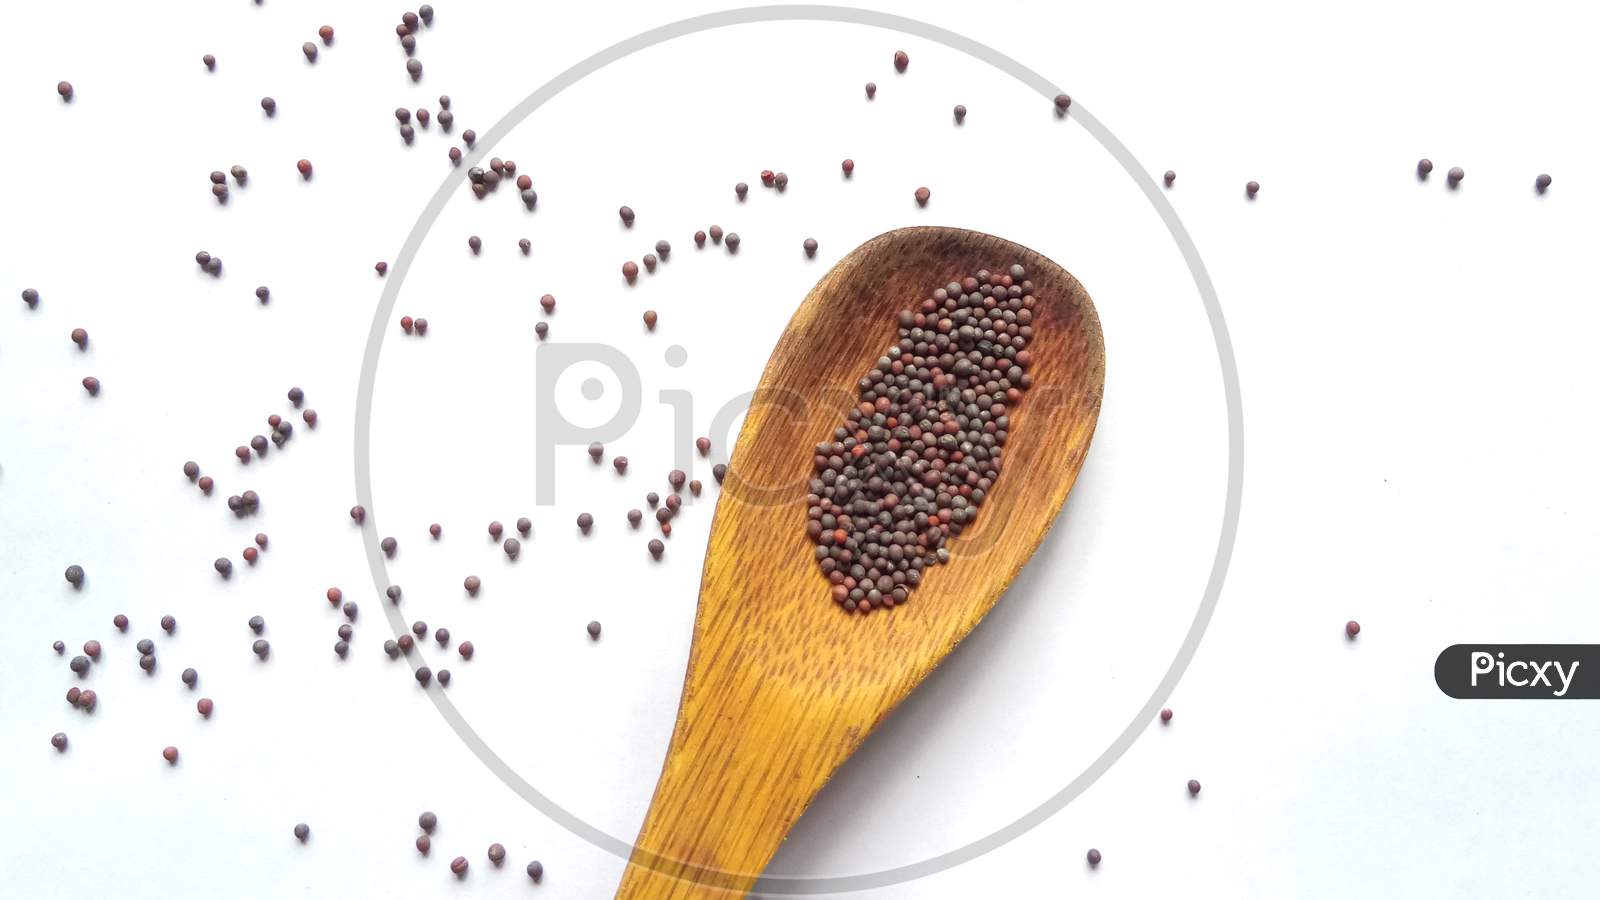 Mustard seeds in wooden spoon isolated